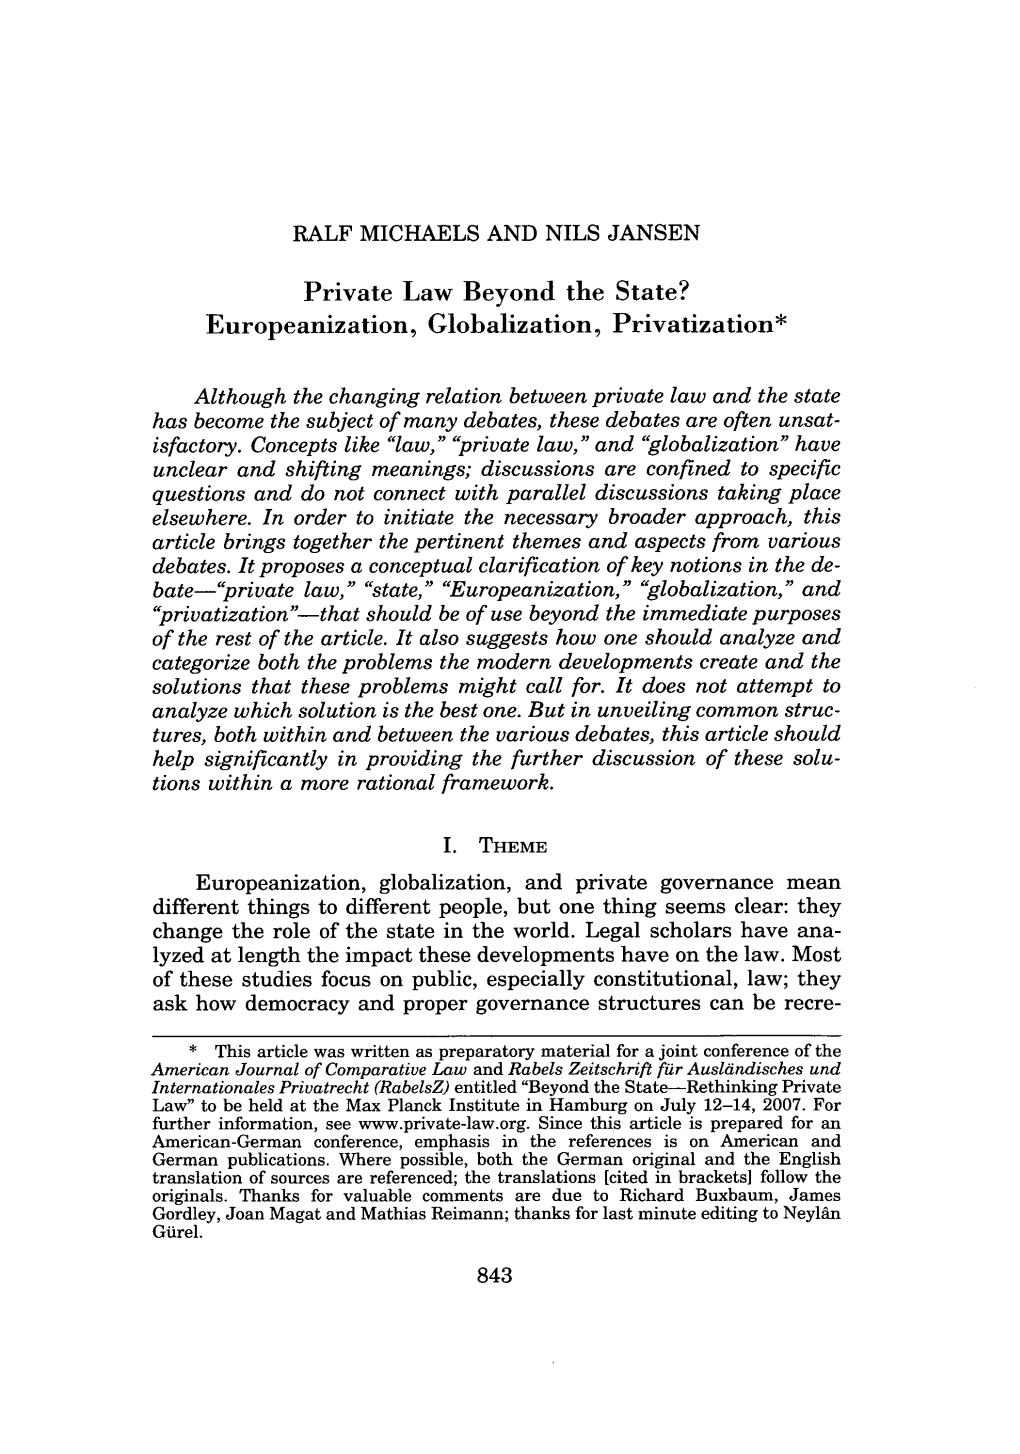 Private Law Beyond the State? Europeanization, Globalization, Privatization*